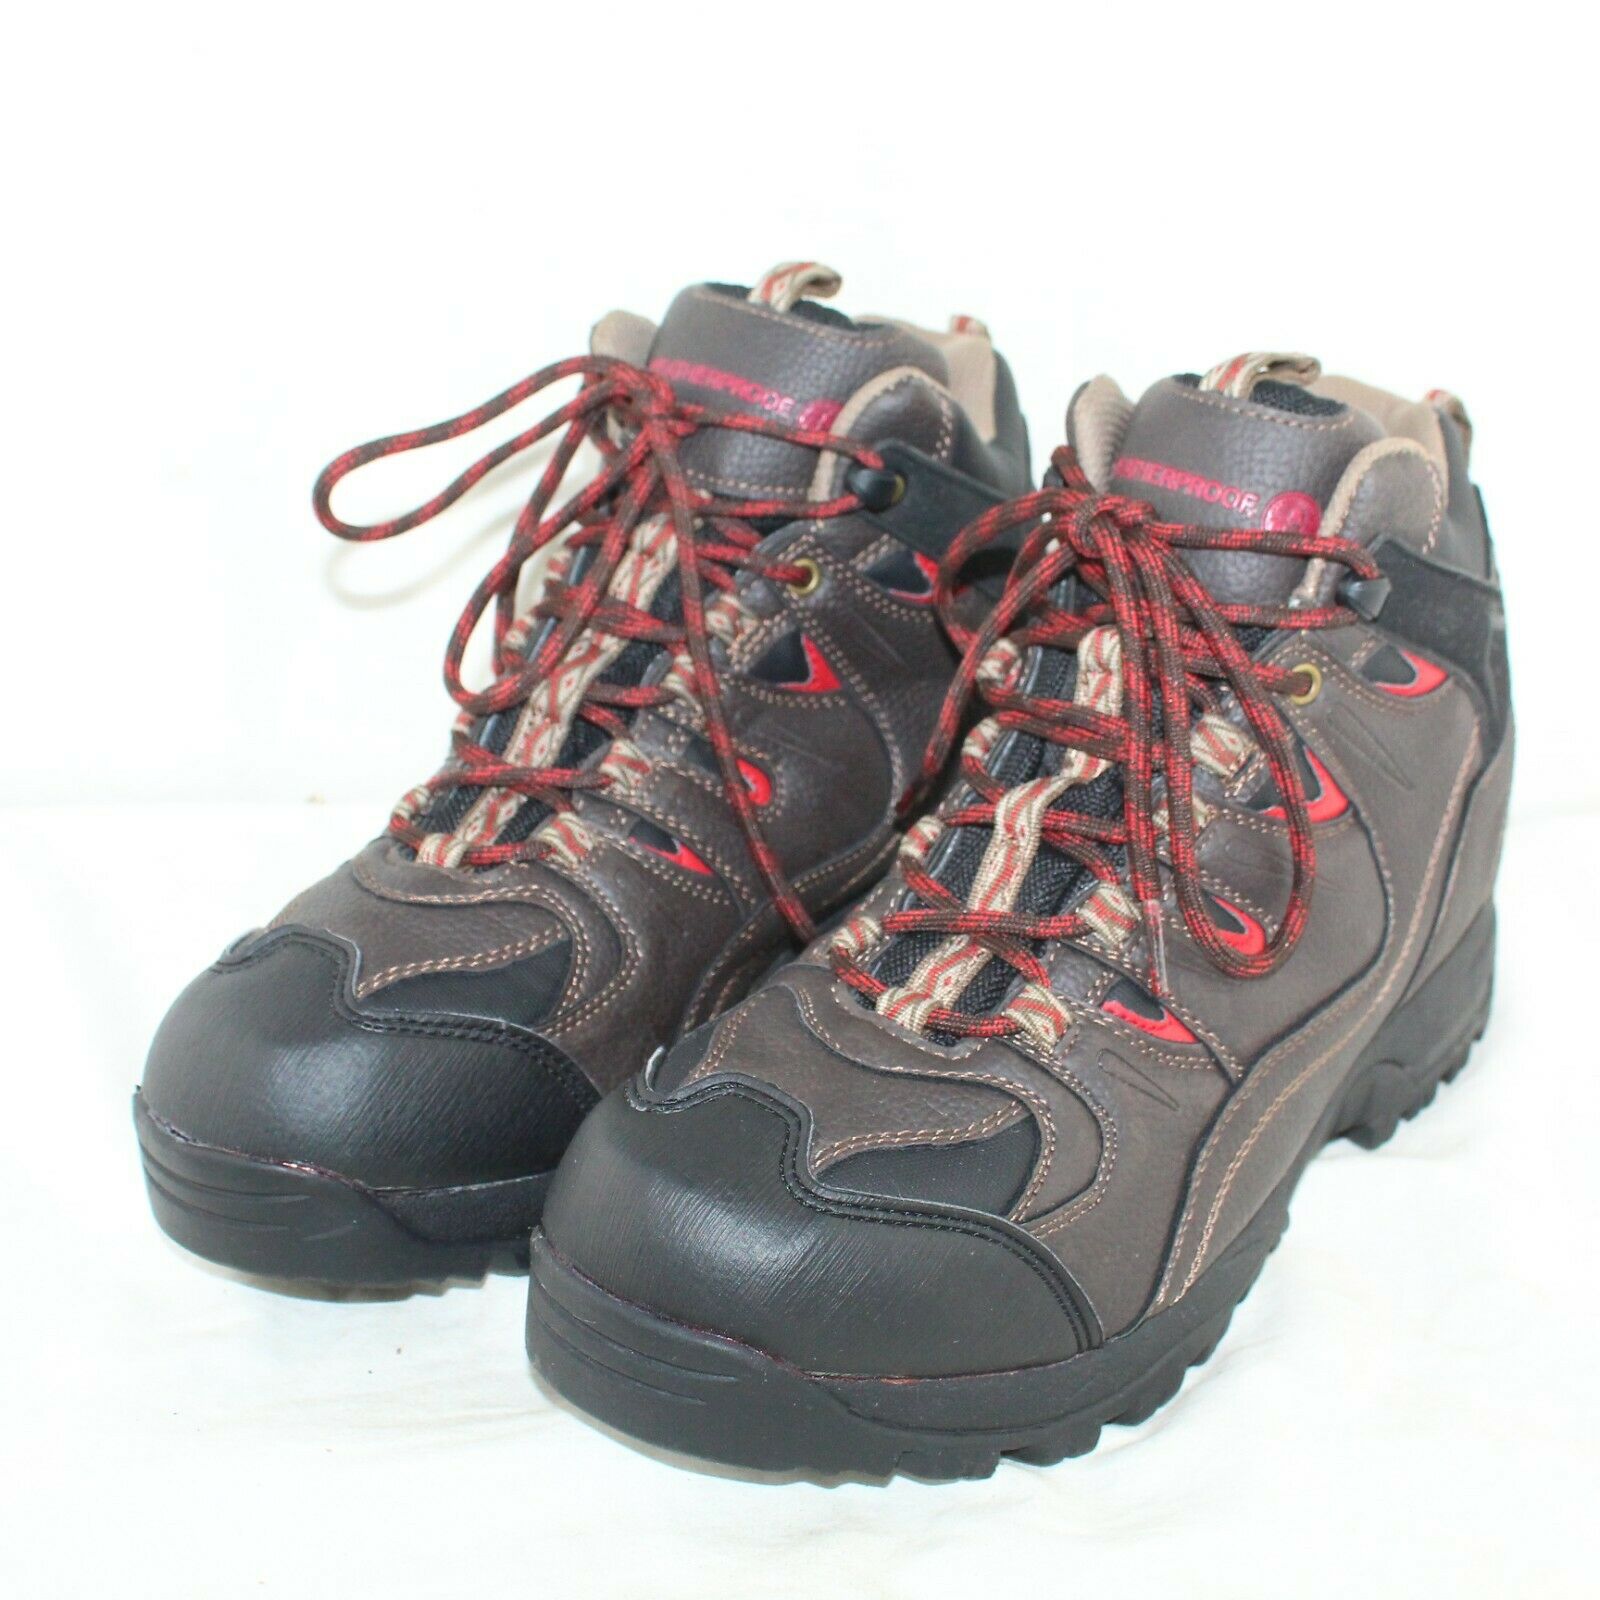 WEATHERPROOF men's lace up low heel black & brown leather hiking boots size 12 M